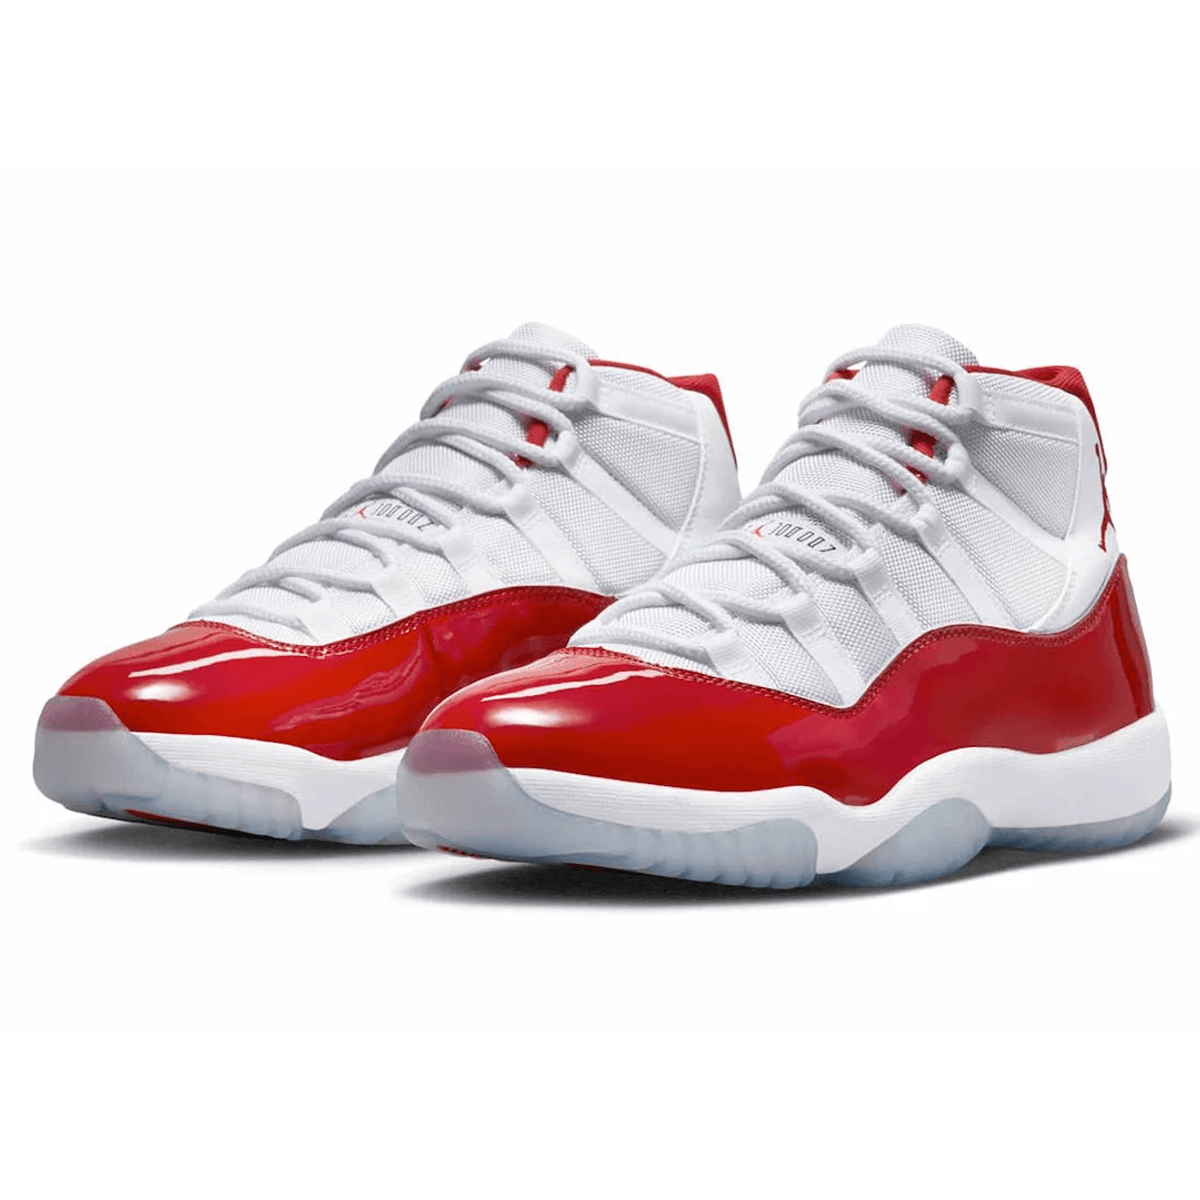 Nike Keeps It's Annual Air Jordan Tradition Alive With The Release of the Air Jordan Retro 11 Cherry